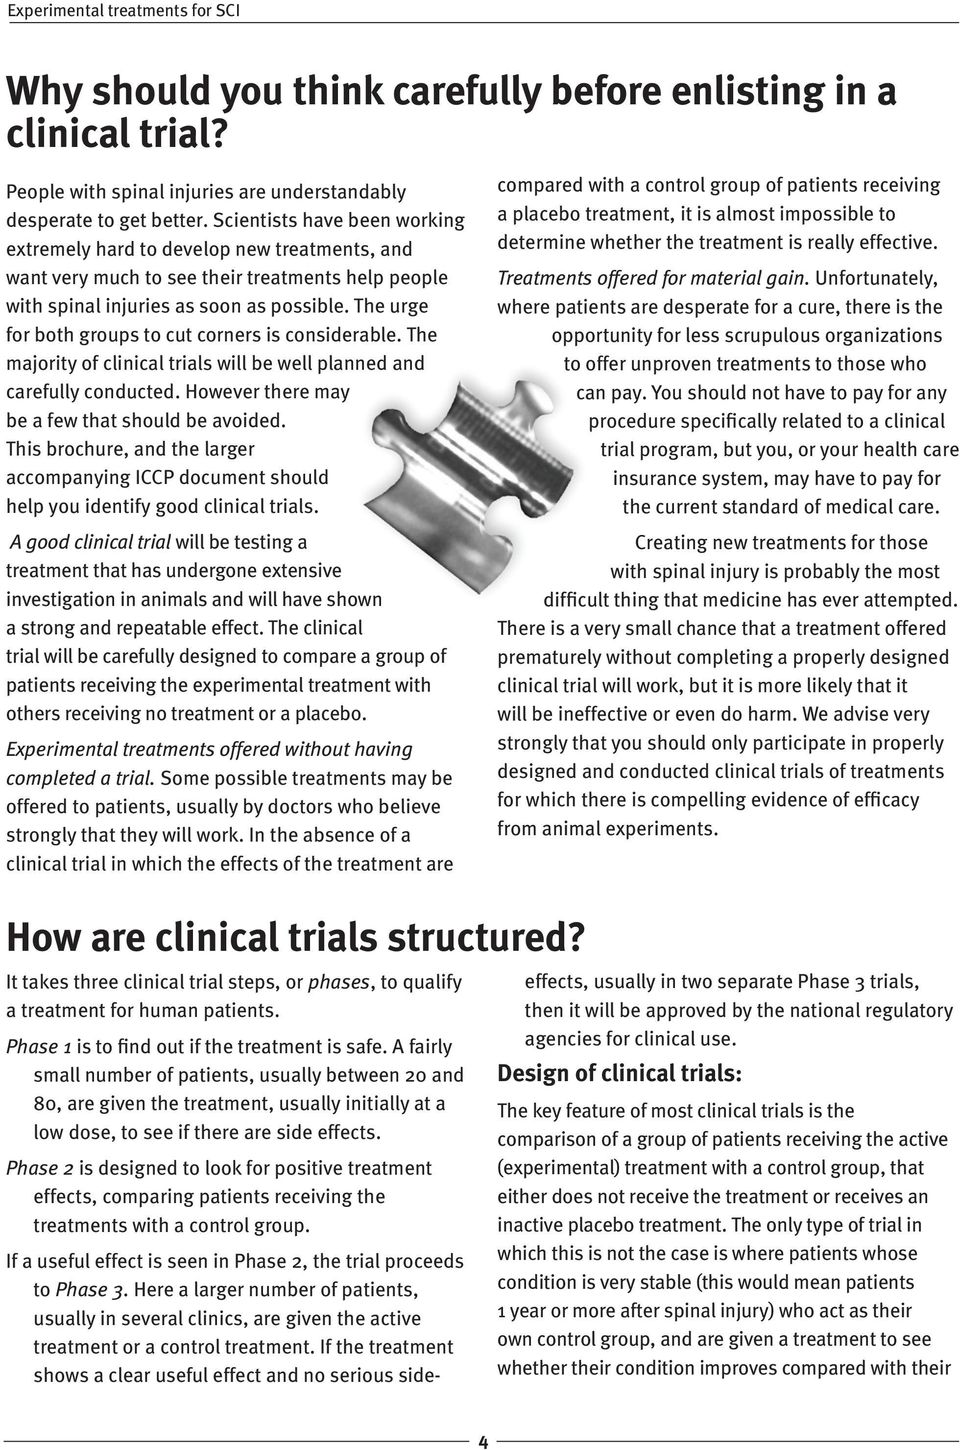 The urge for both groups to cut corners is considerable. The majority of clinical trials will be well planned and carefully conducted. However there may be a few that should be avoided.